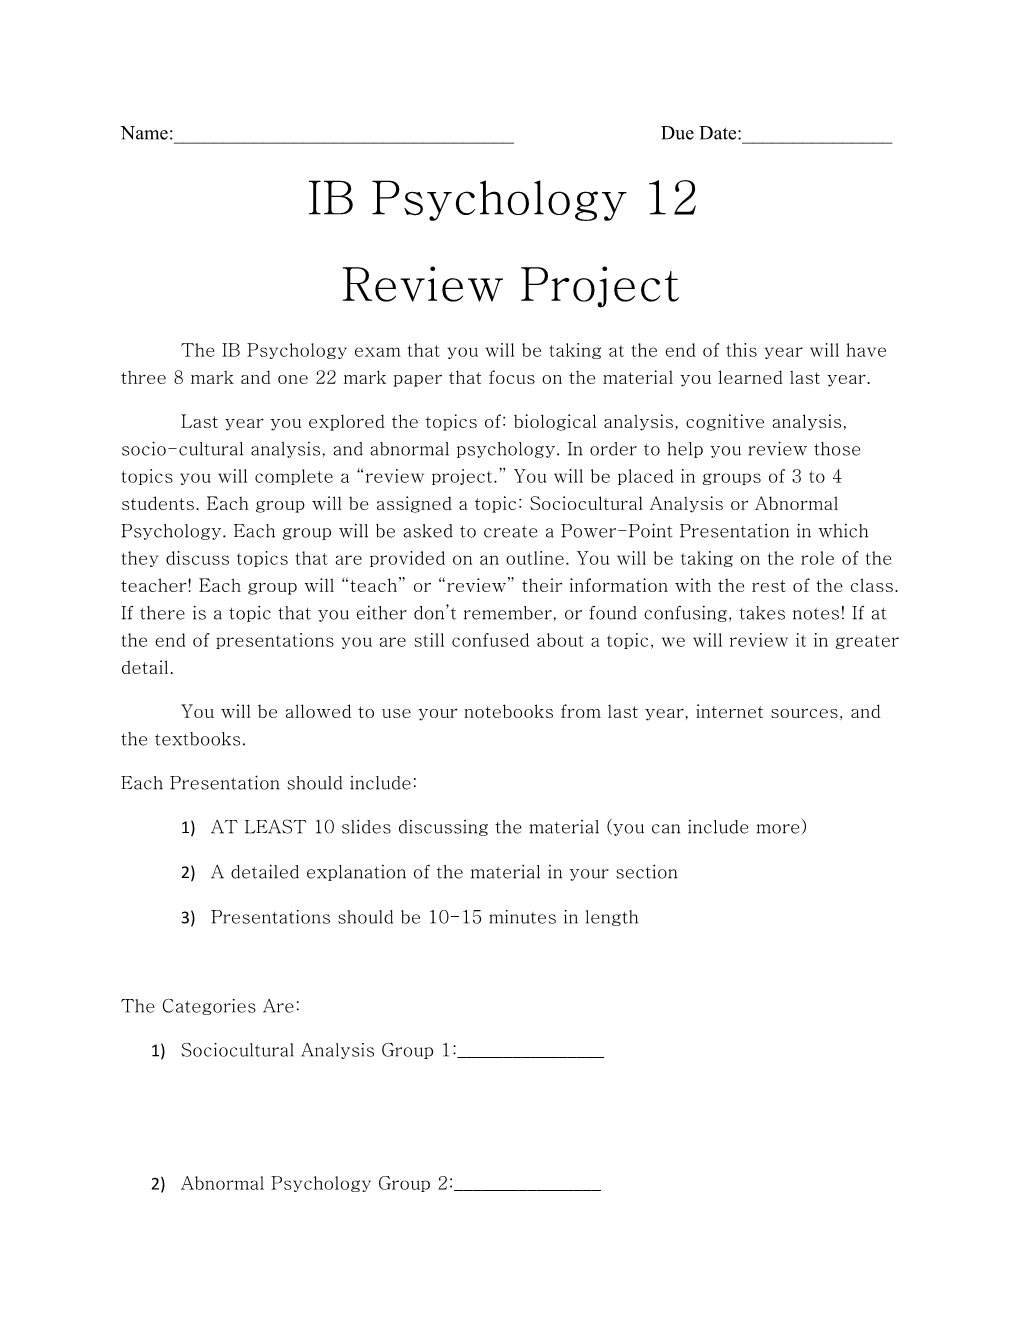 Review Project